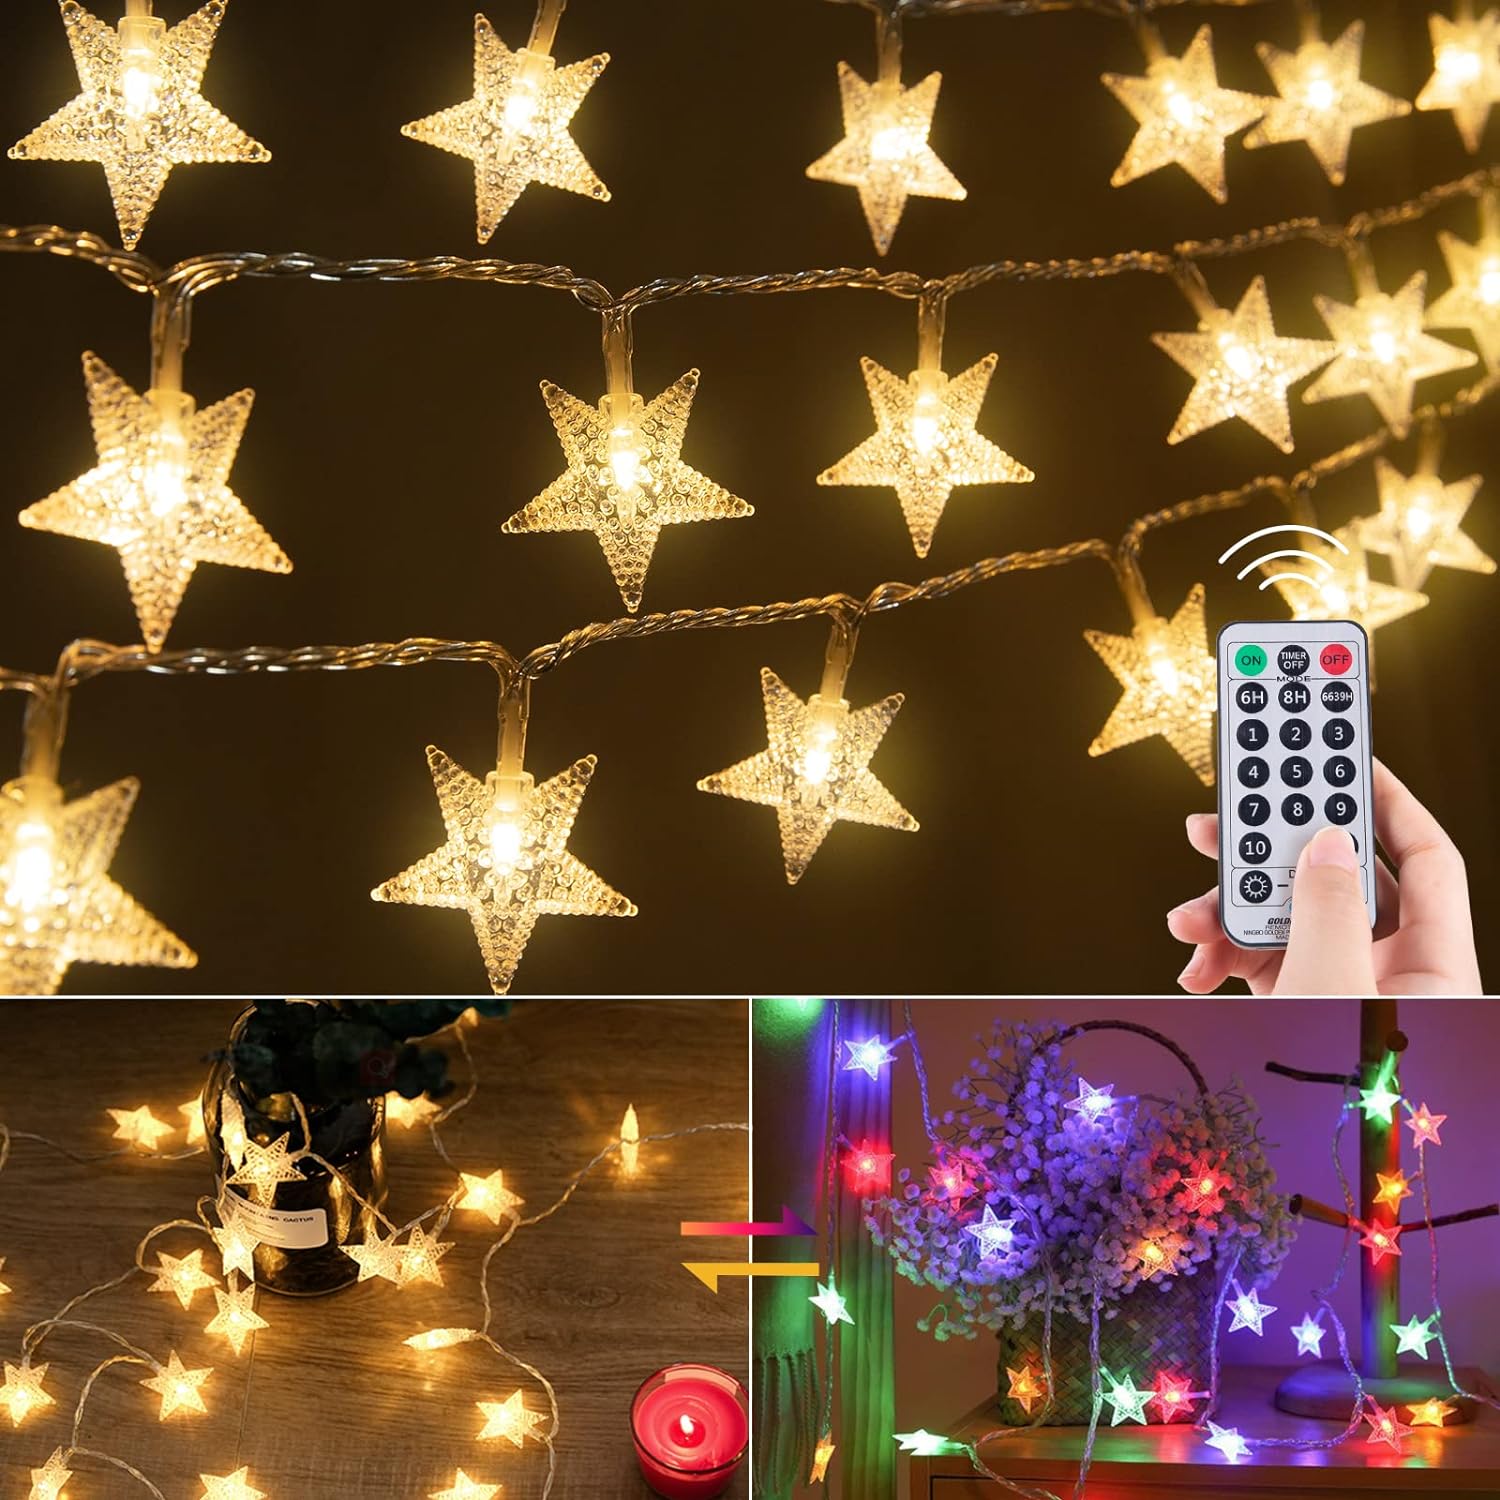 Minetom Star String Lights Plug in - 33 ft 100 LED Star Fairy String Lights with Remote and Timer, Waterproof for Bedroom Tent Loft Bed Shelf Porch Patio Garden Party Dcor, Warm White   Multicolor